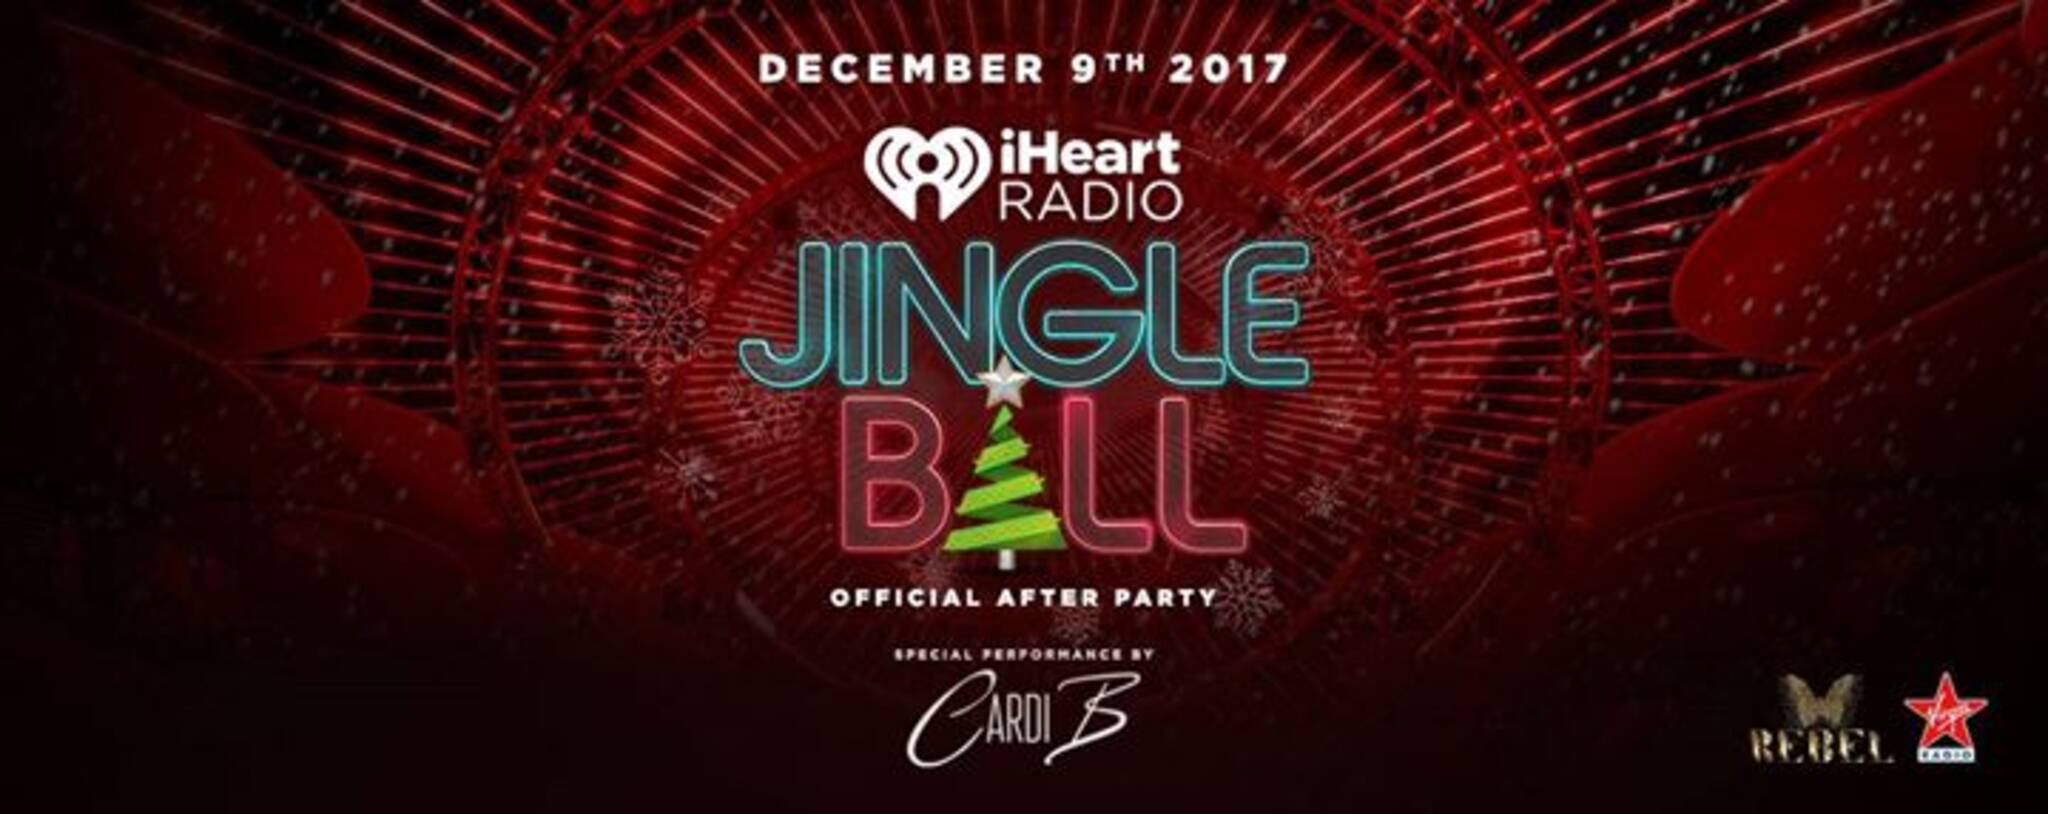 IHeart Radio Jingle Ball AfterParty feat. Cardi B at REBEL